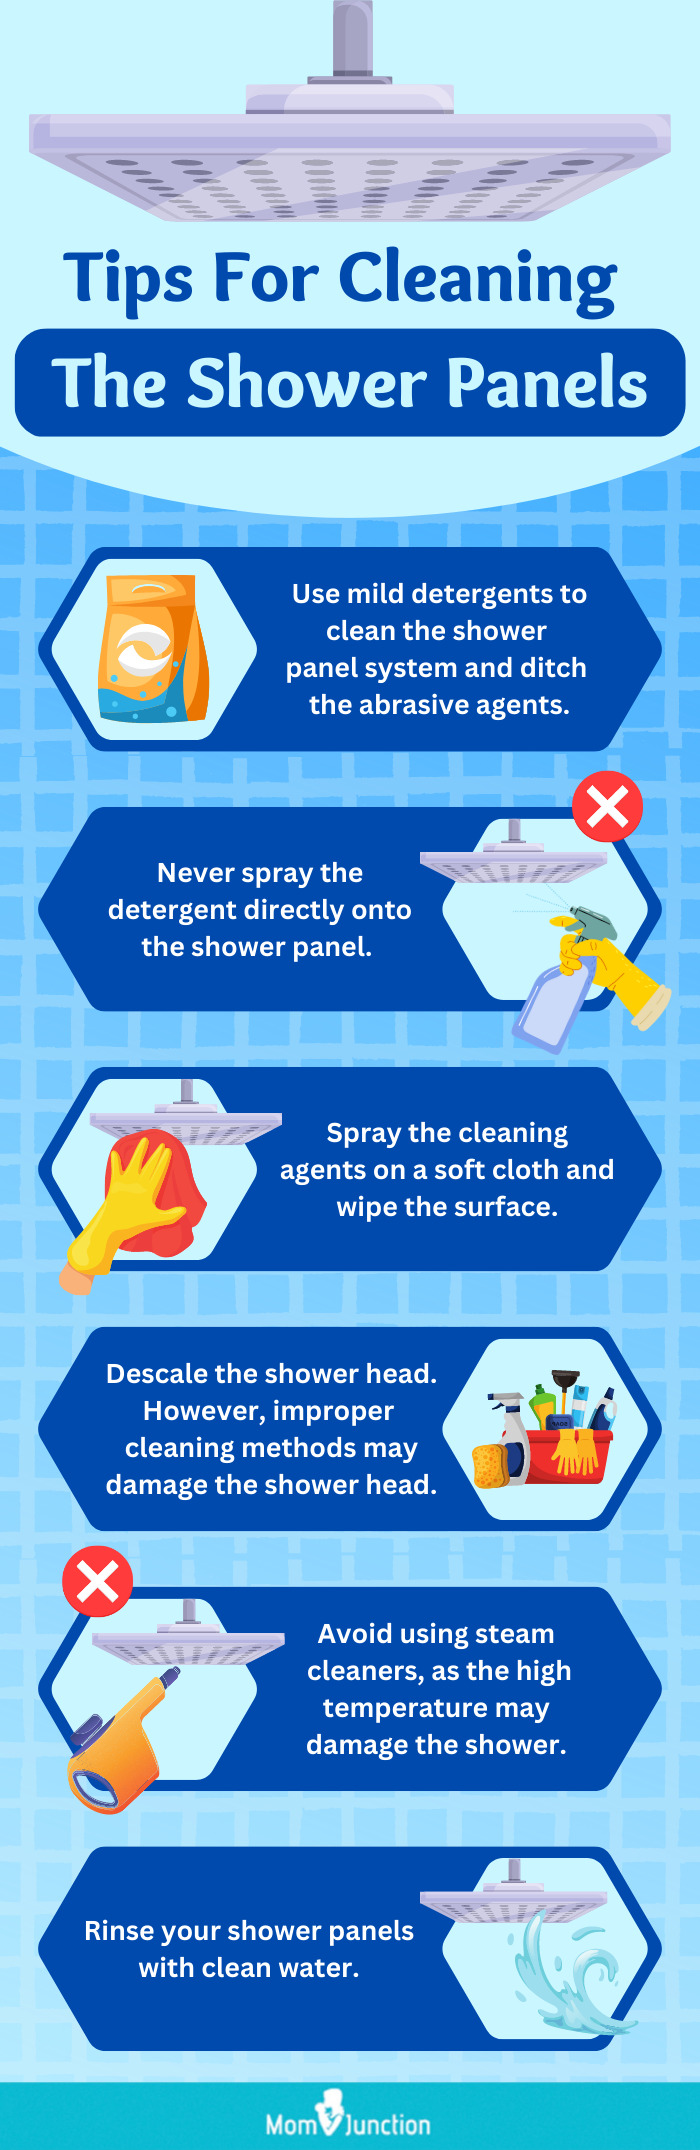 Tips For Cleaning The Shower Panels [infographic]